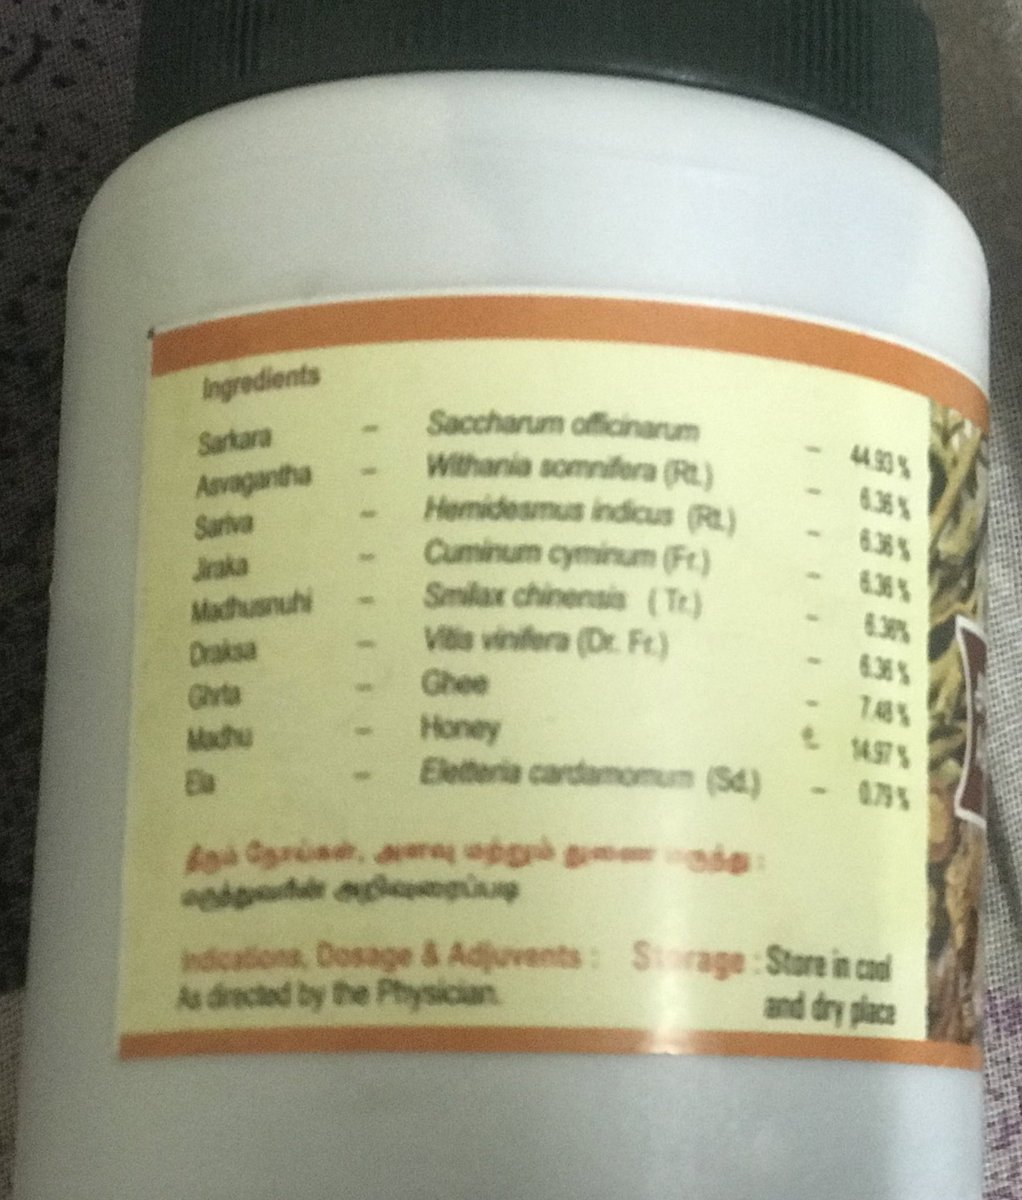 @theliverdr attached pic with ingredients of #asvagantha #ayurvedic #Medicine prescribed by my physician to be taken daily #halfSpoon #morning & #night
Will this medicine taken daily with above dosage can cause #liverInjury